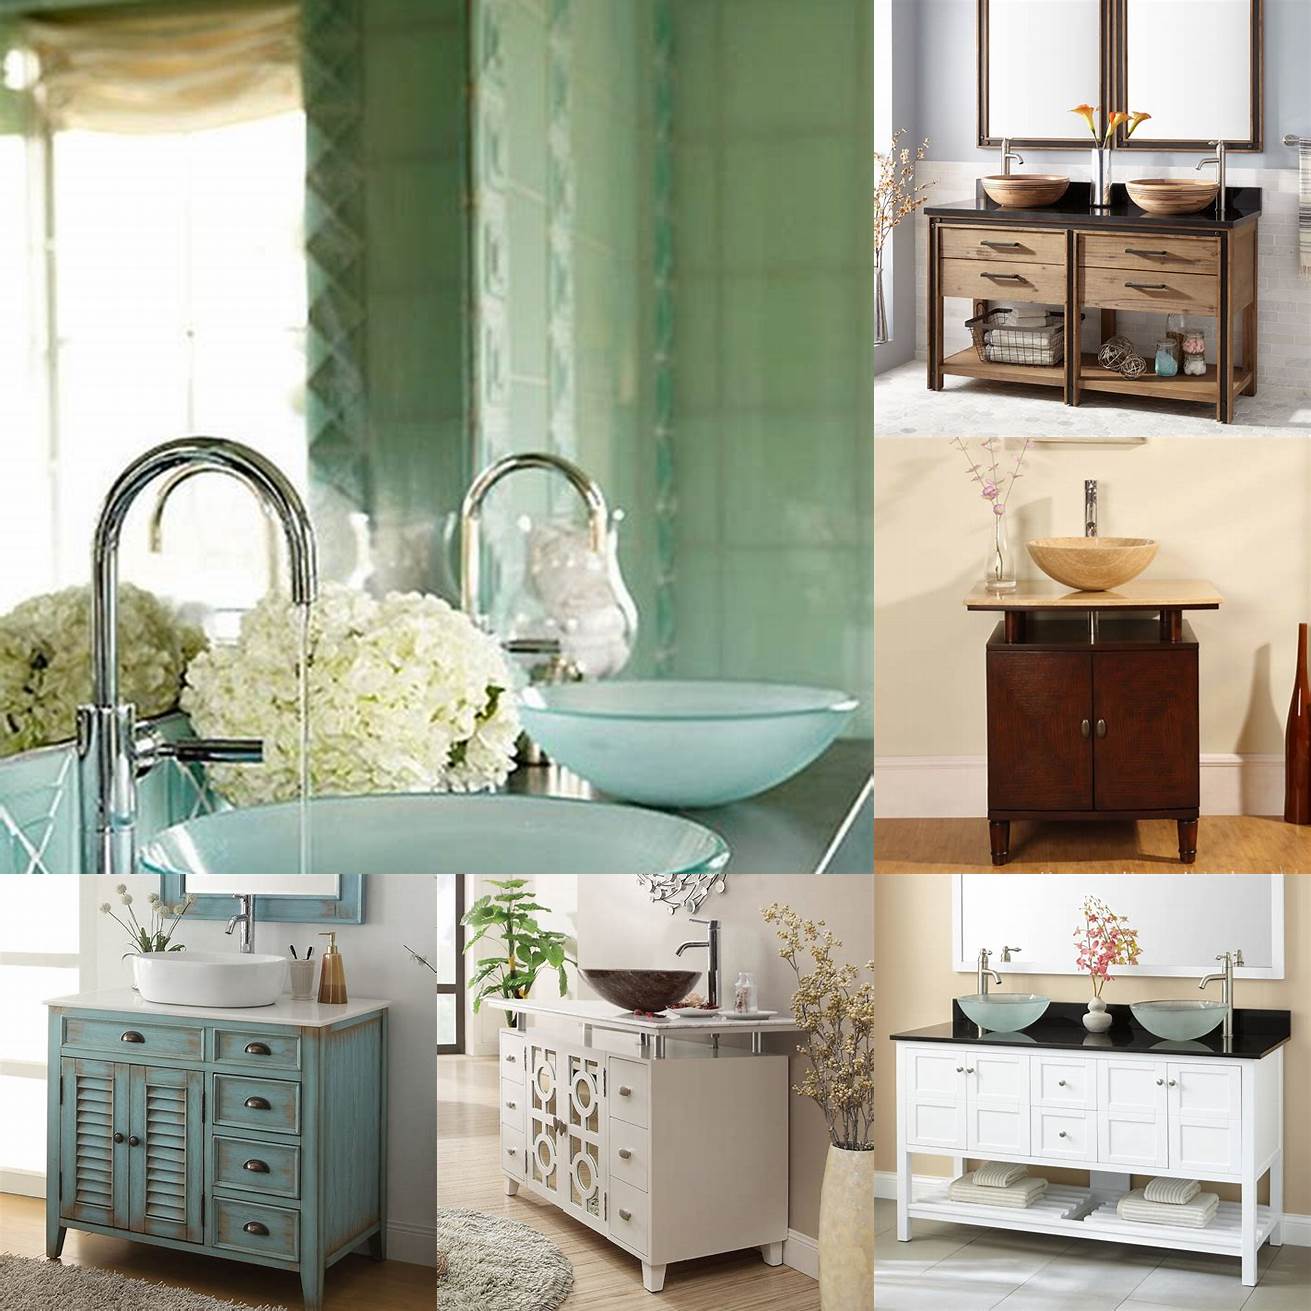 A vessel sink bathroom vanity comes in a variety of colors making it easy to find one that suits your bathrooms style